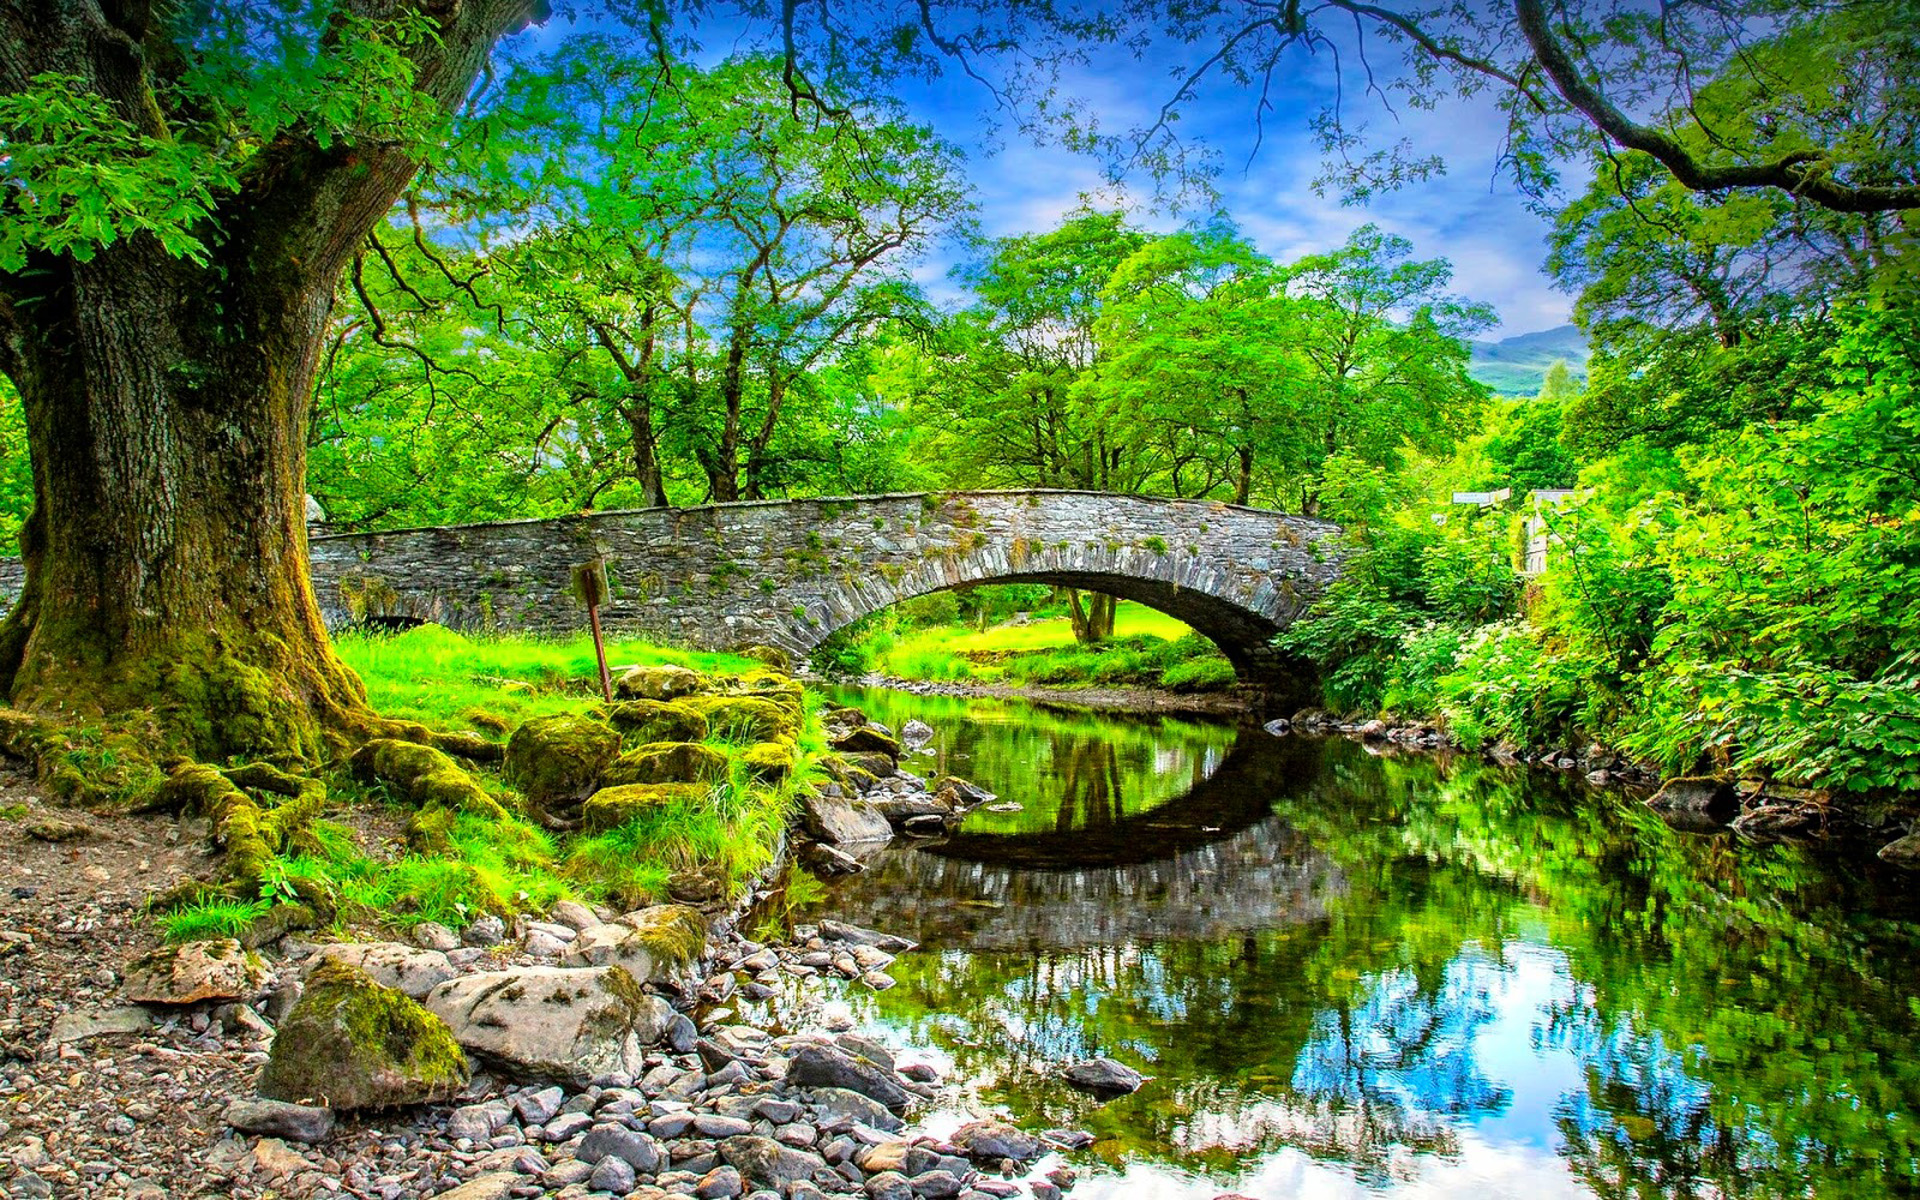 Summer Landscape Stone Most.mala Calm River Stones Trees With Green